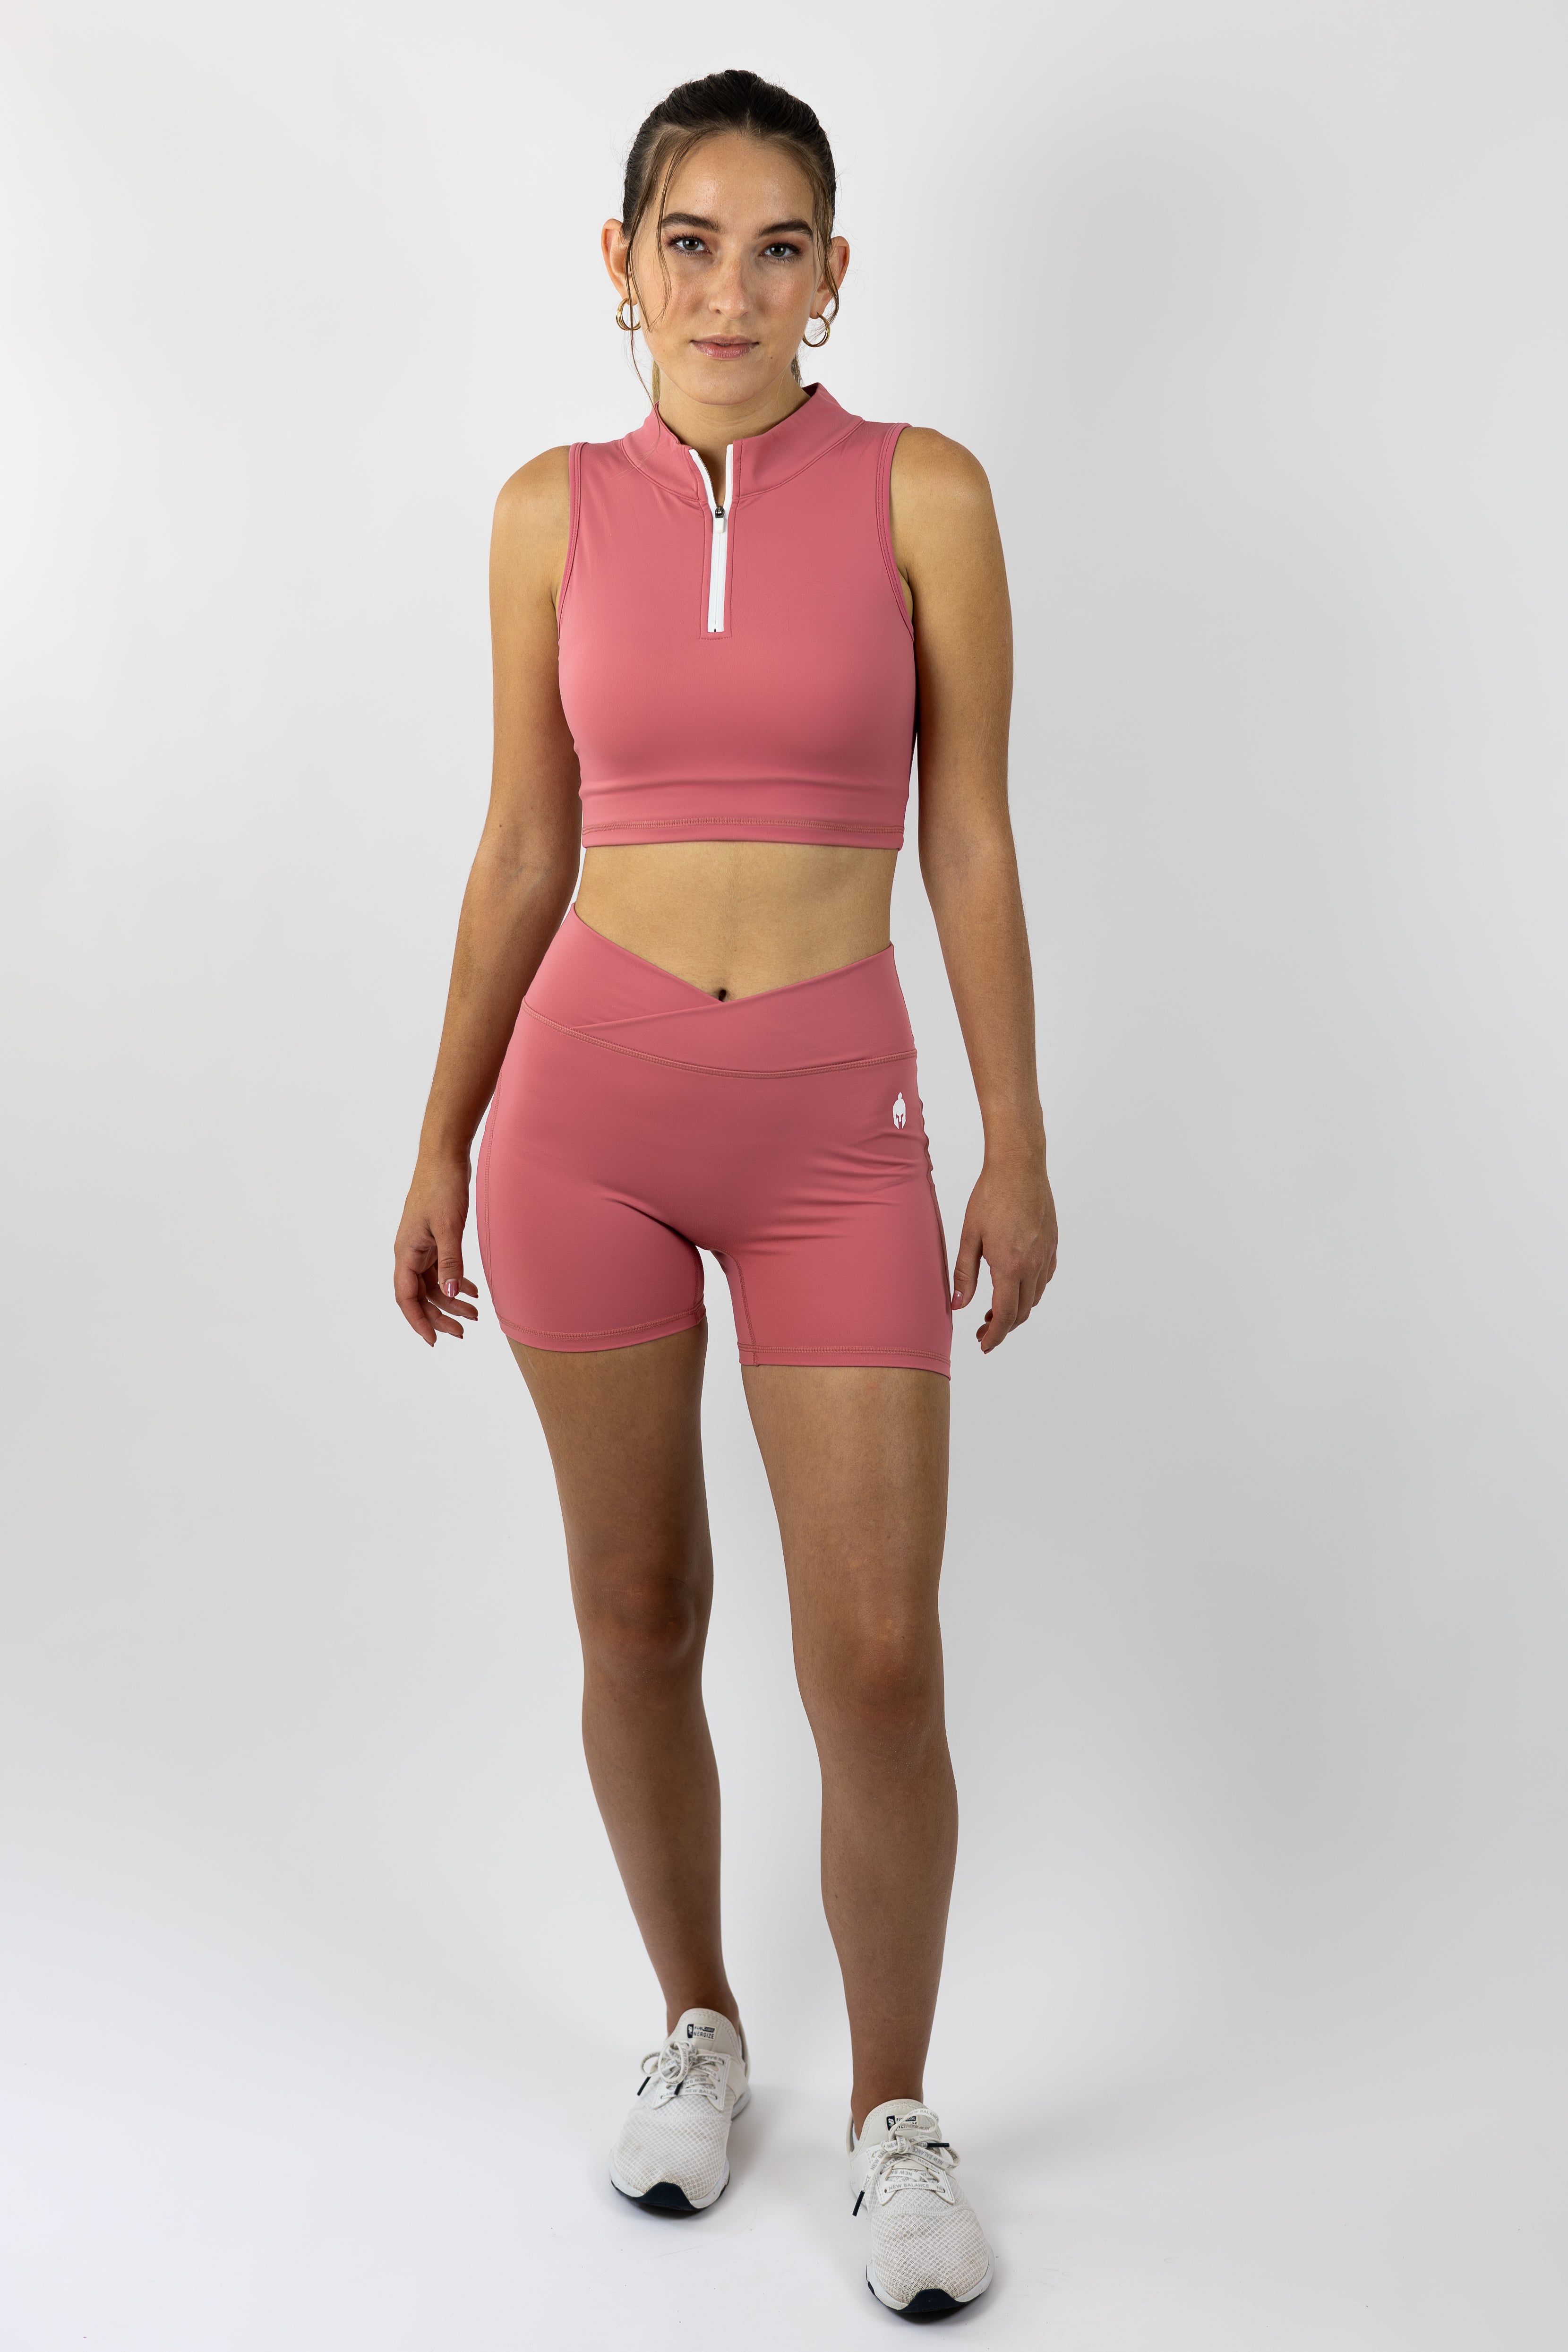 woman modeling medium pink 3/4 zip Strength of One gym top and matching medium pink form fitting gym shorts with warrior logo on right hip